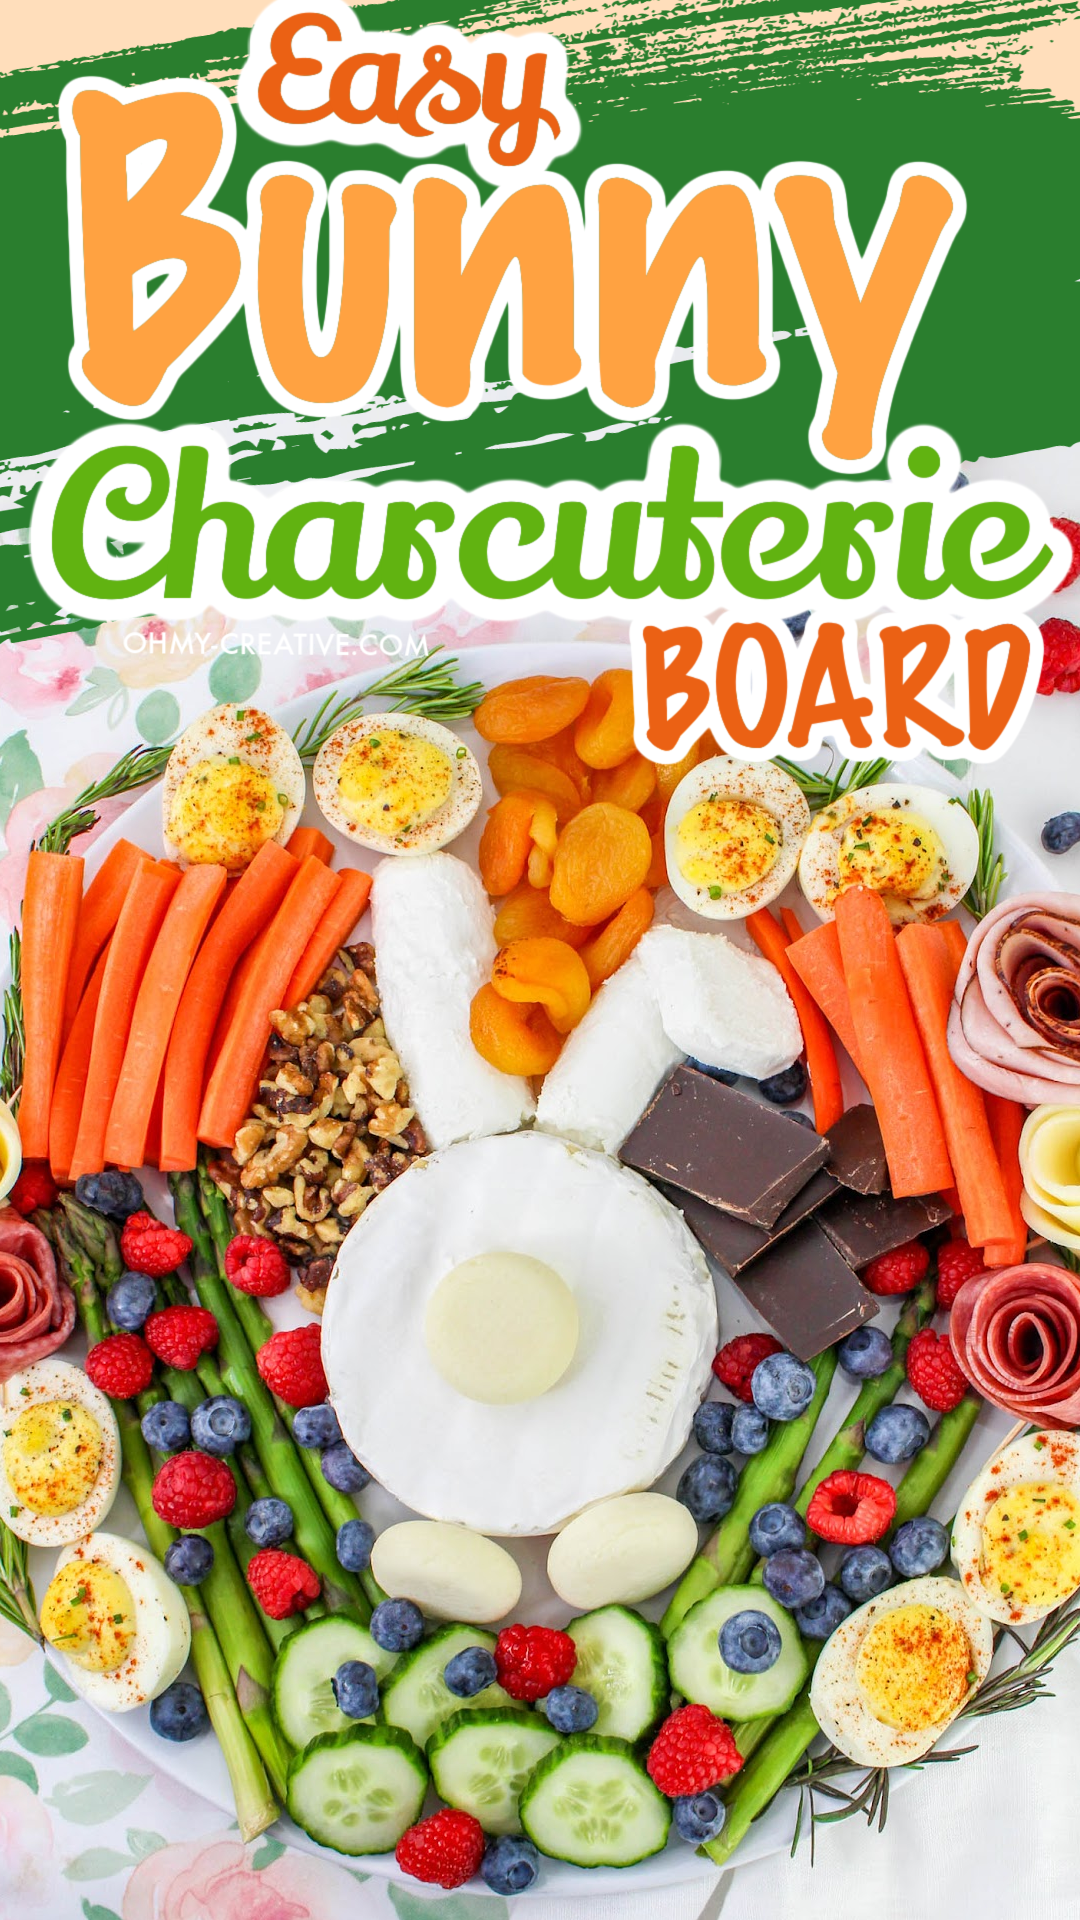 A bunny made of cheese in the center of a fruit and vegetable charcuterie board.